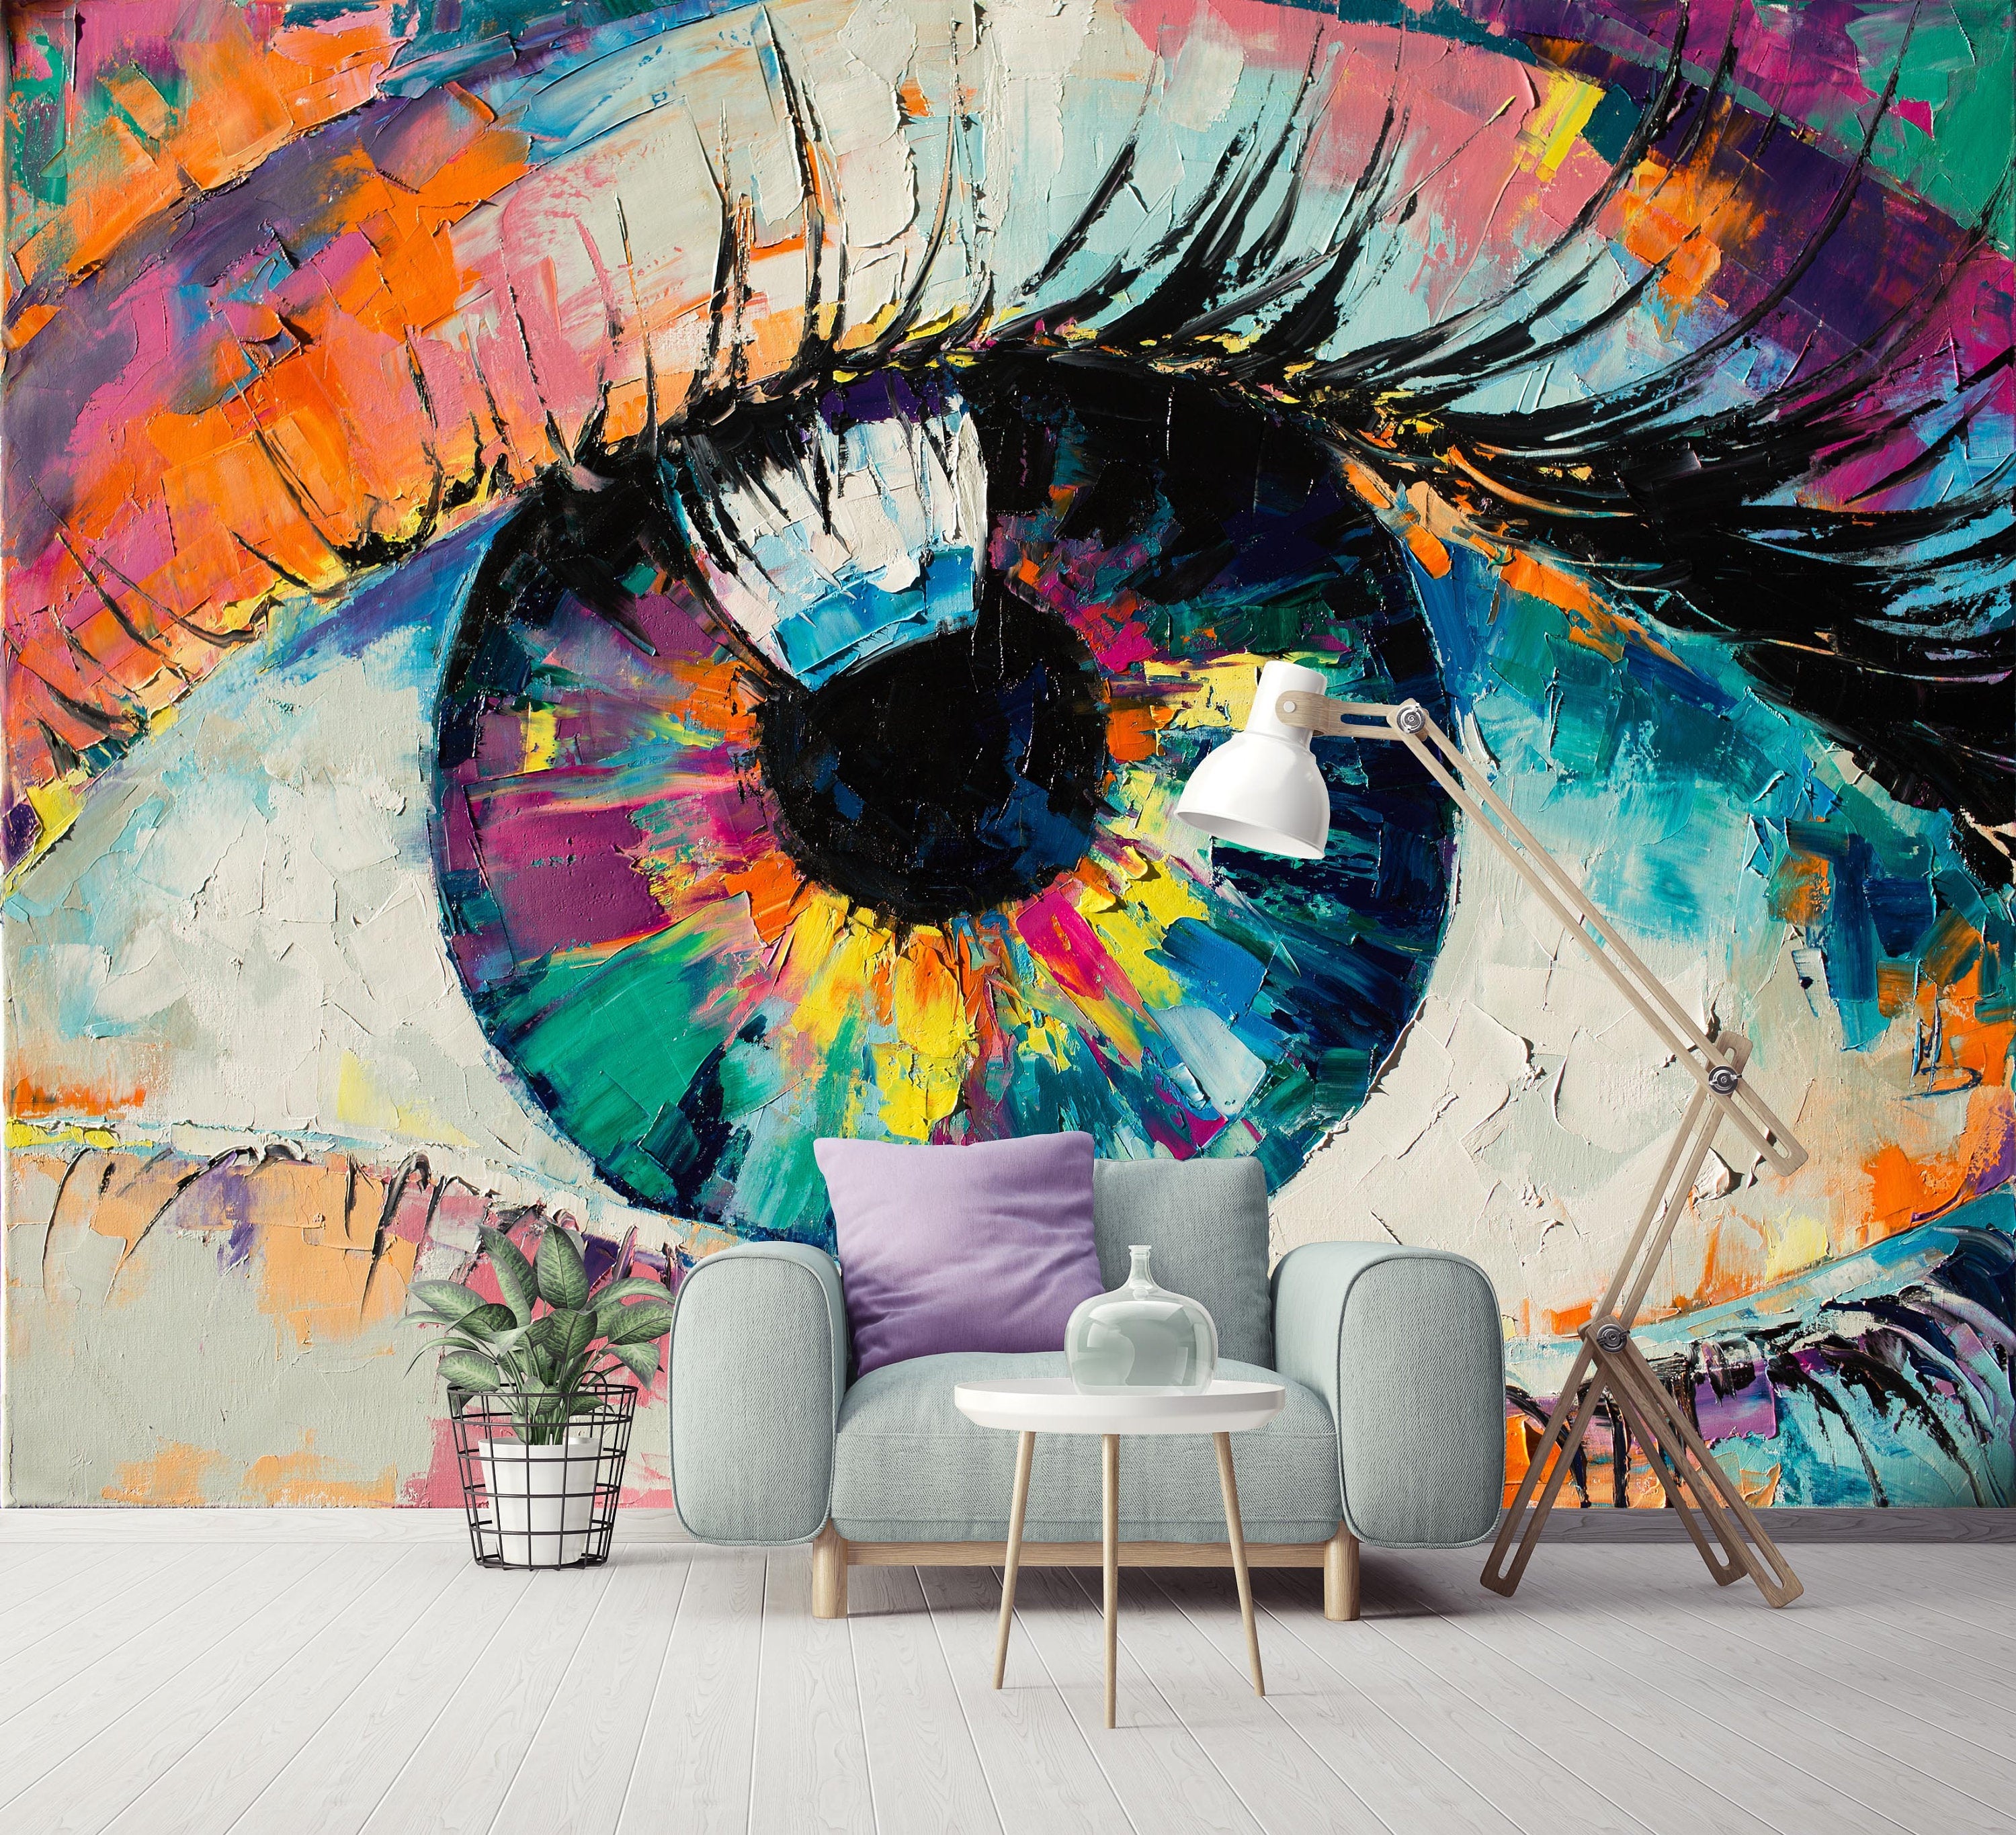 Conceptual Abstract Picture of the Eye Oil Painting in Colorful Colors Wallpaper Self Adhesive Peel and Stick Wall Sticker Wall Decoration